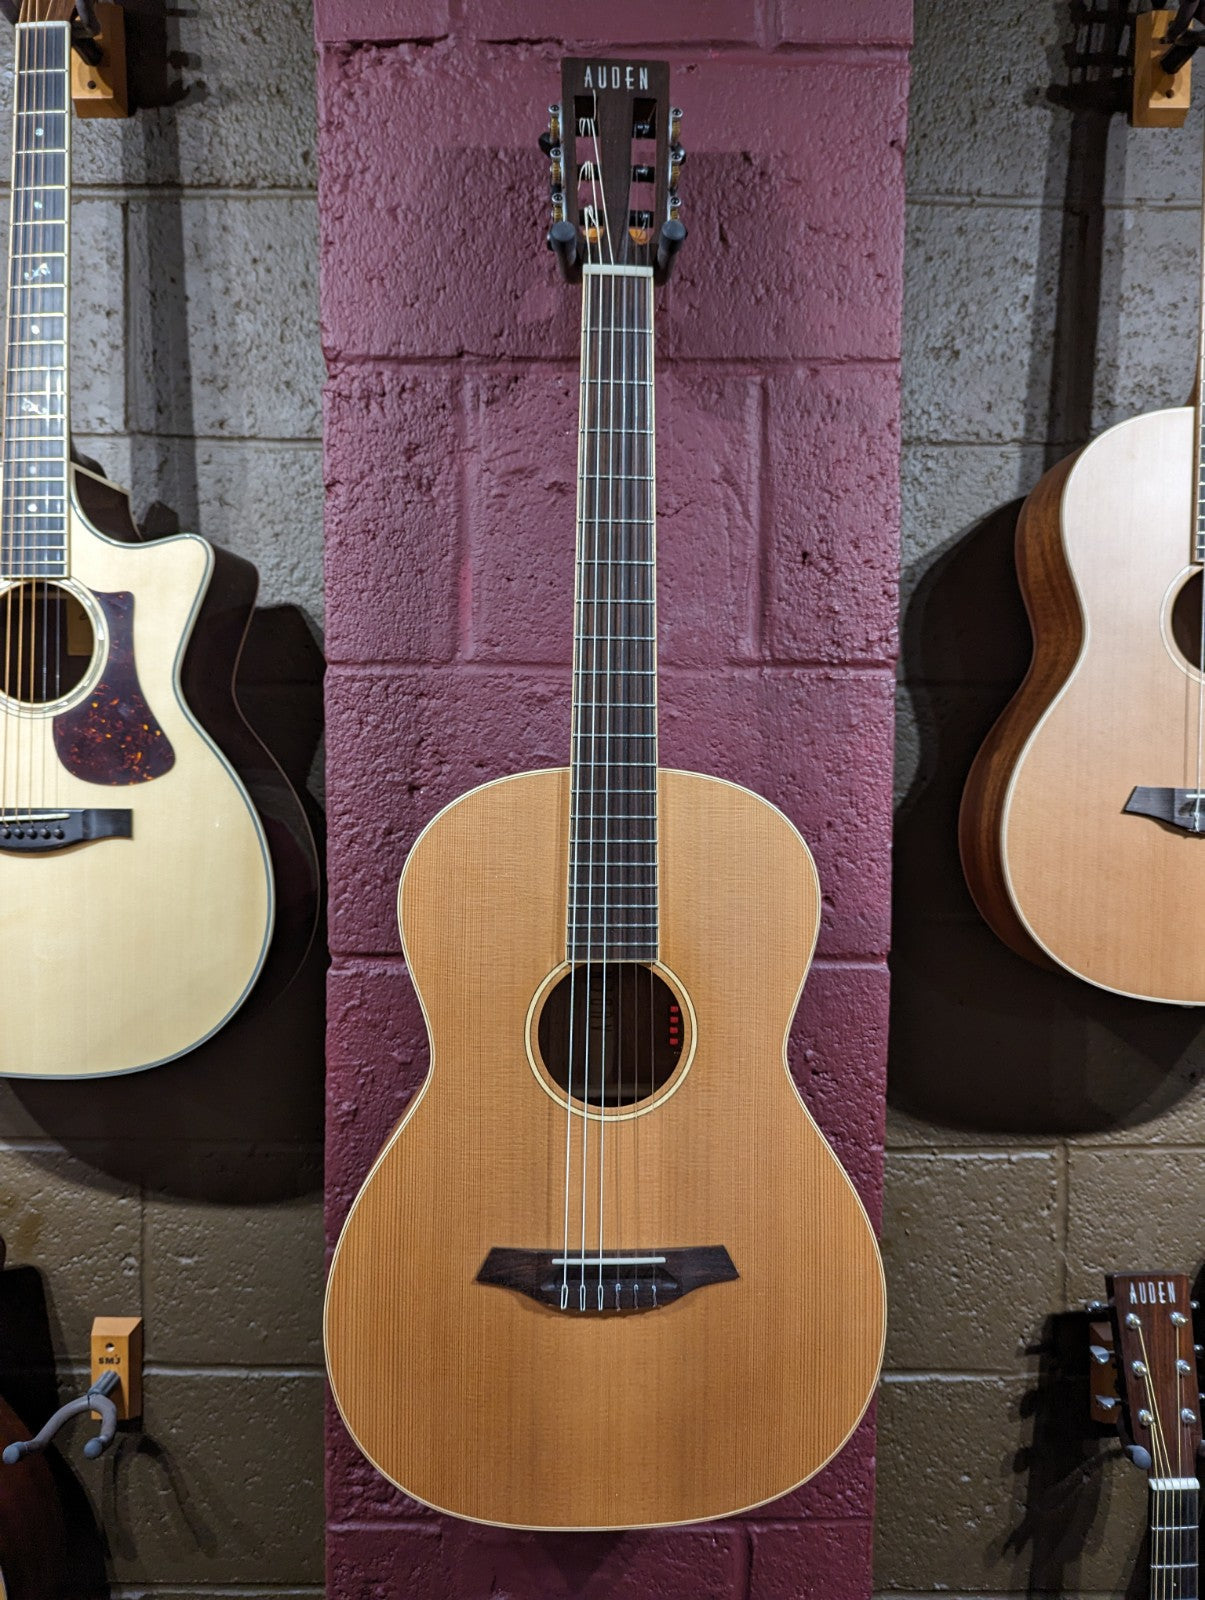 Auden York electro acoustic (Used), Electro Acoustic Guitar for sale at Richards Guitars.